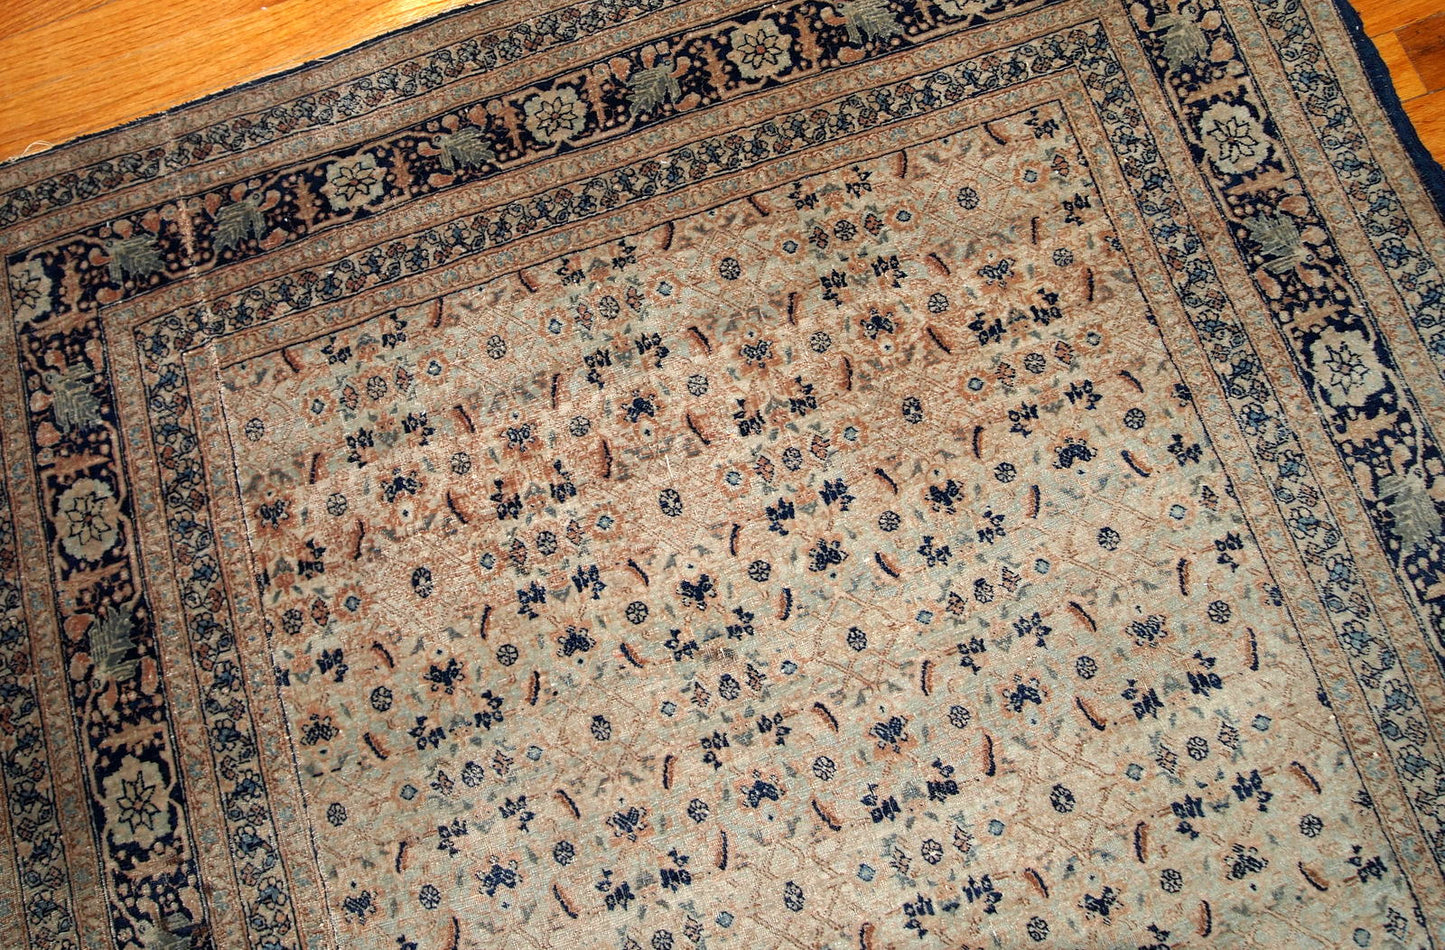 Antique Persian Tabriz Hajalili rug in beige, brown and blue wool. The rug is from the end of 19th century, it has one cut.